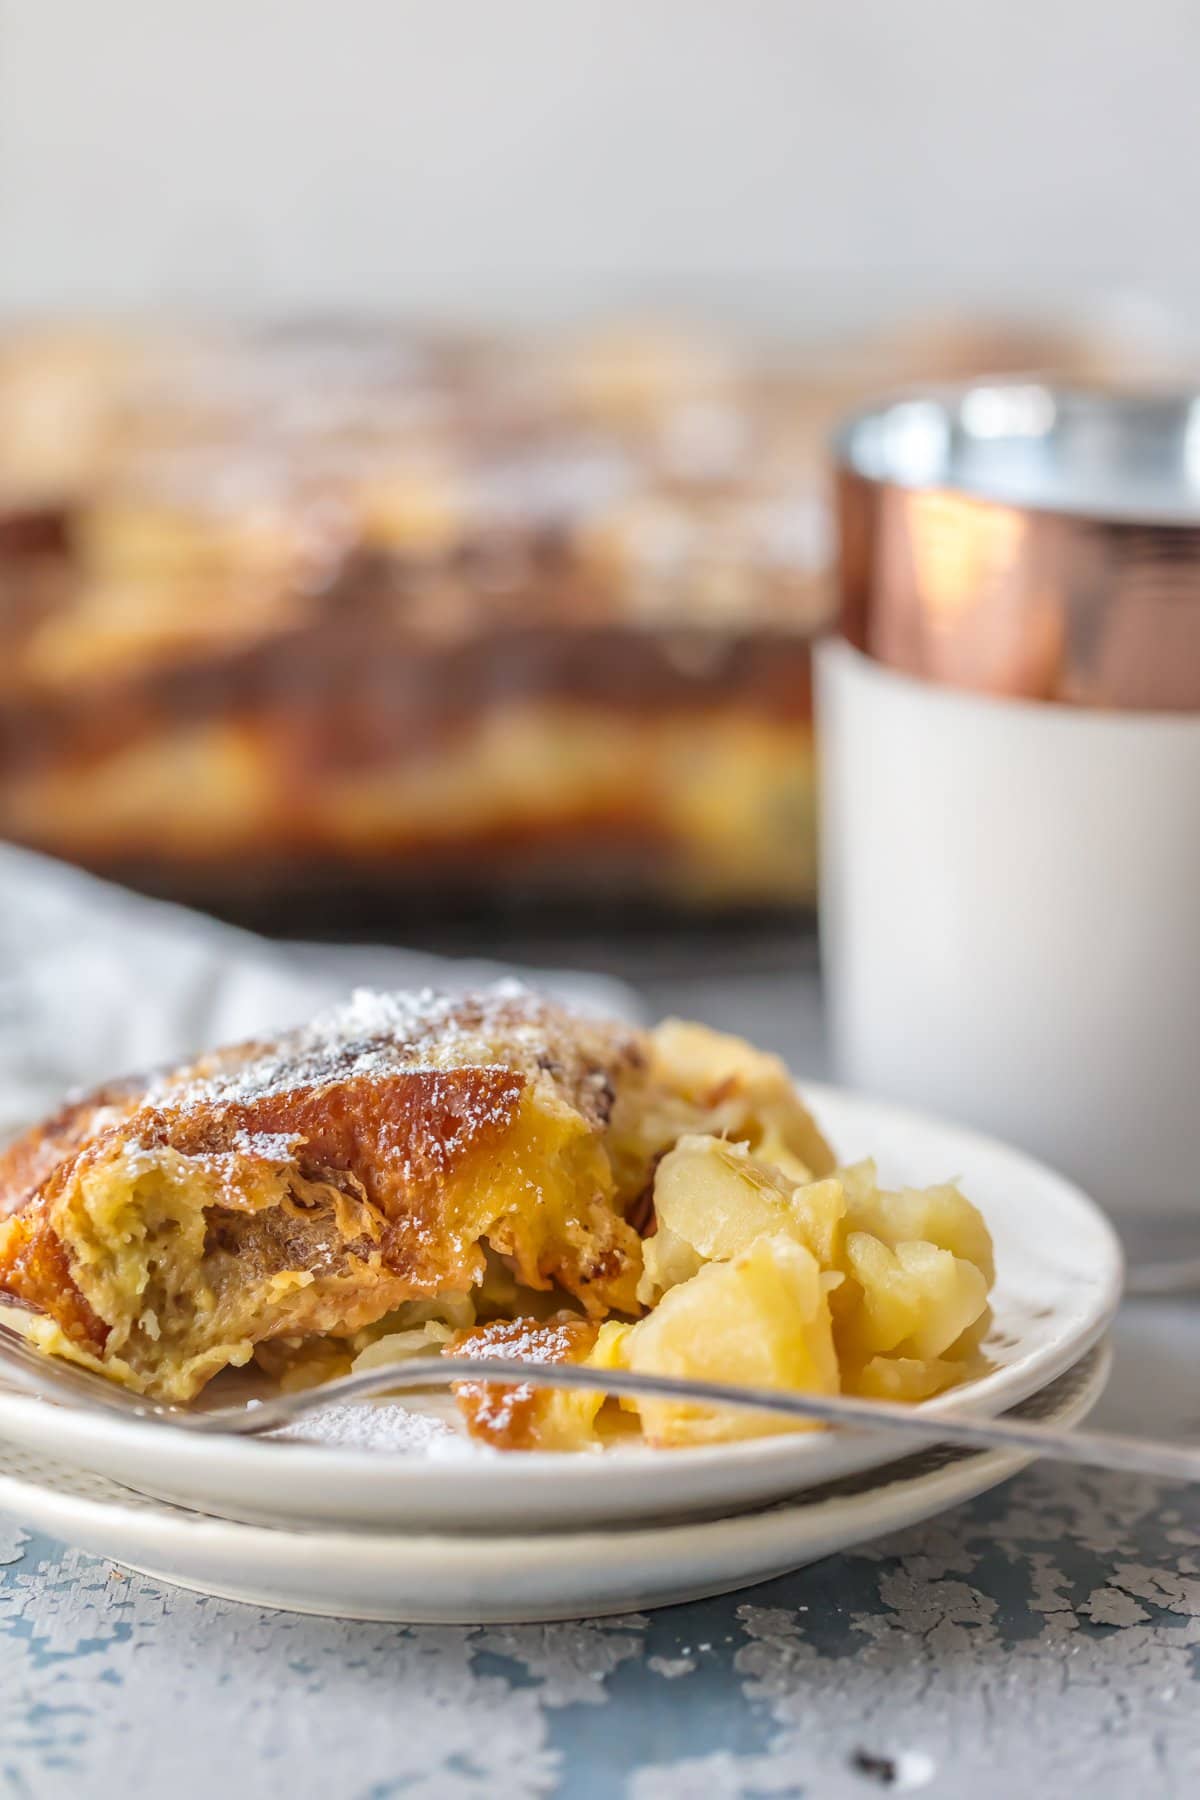 A plate of french toast casserole with apples